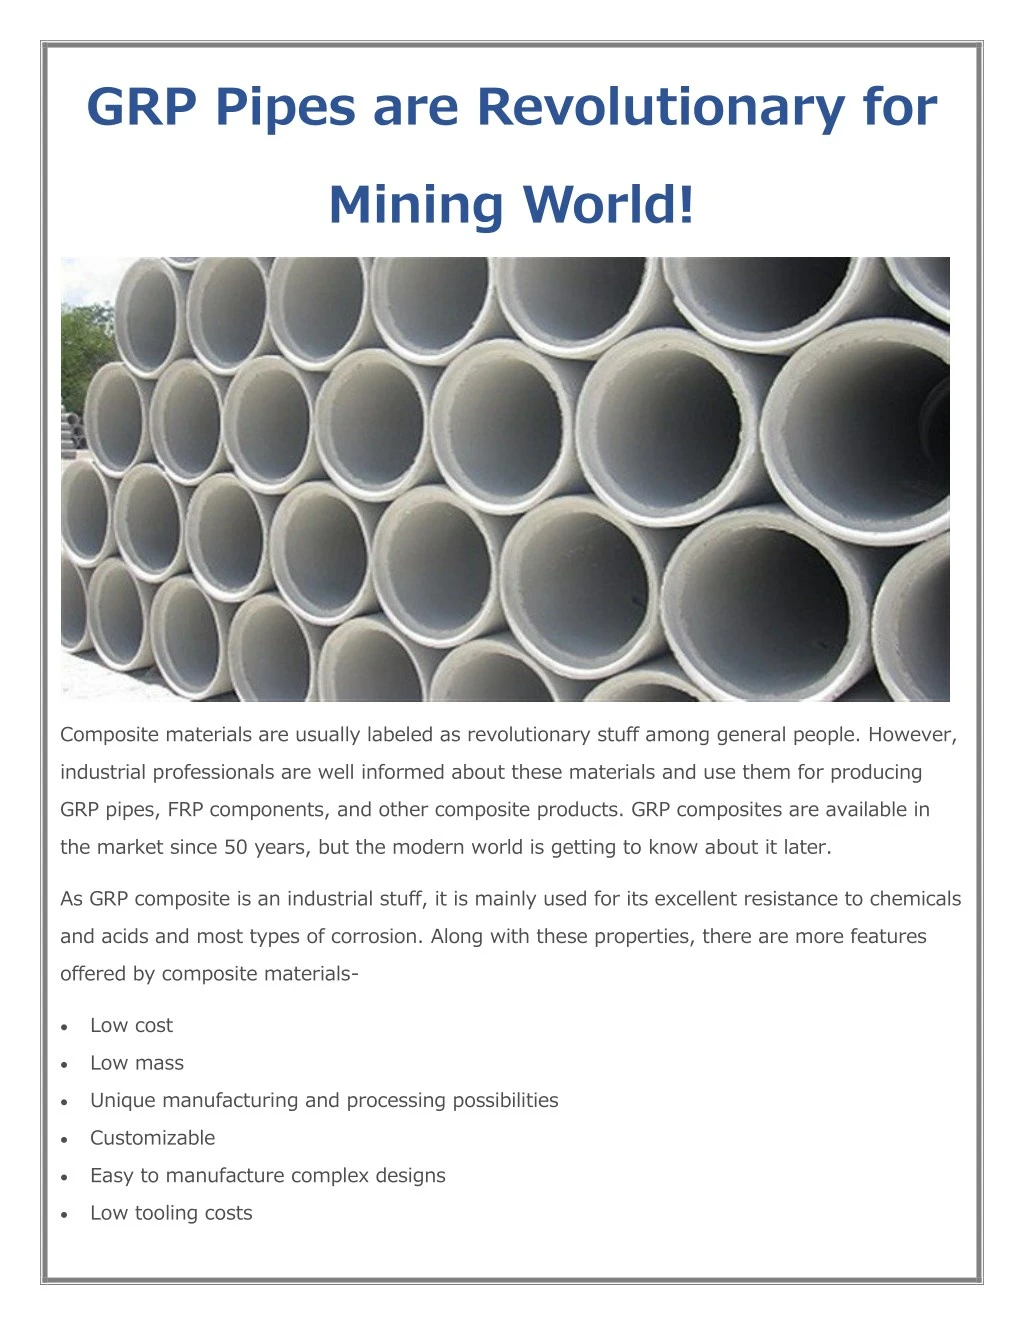 grp pipes are revolutionary for mining world